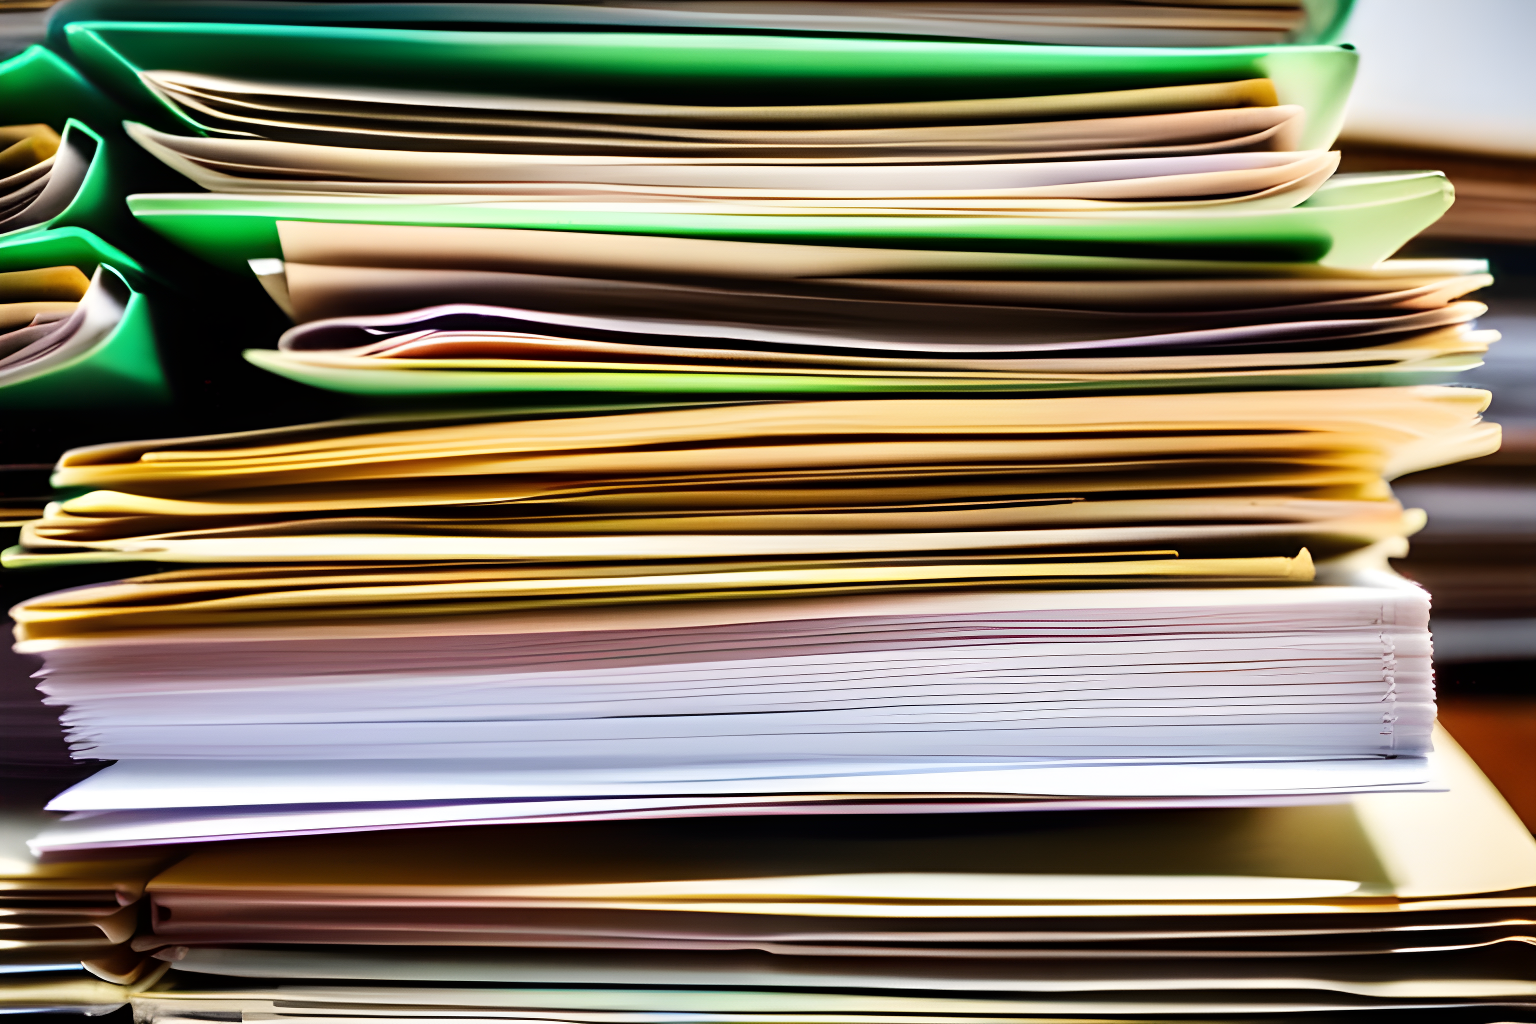 a pile of documents titled "COPPA"